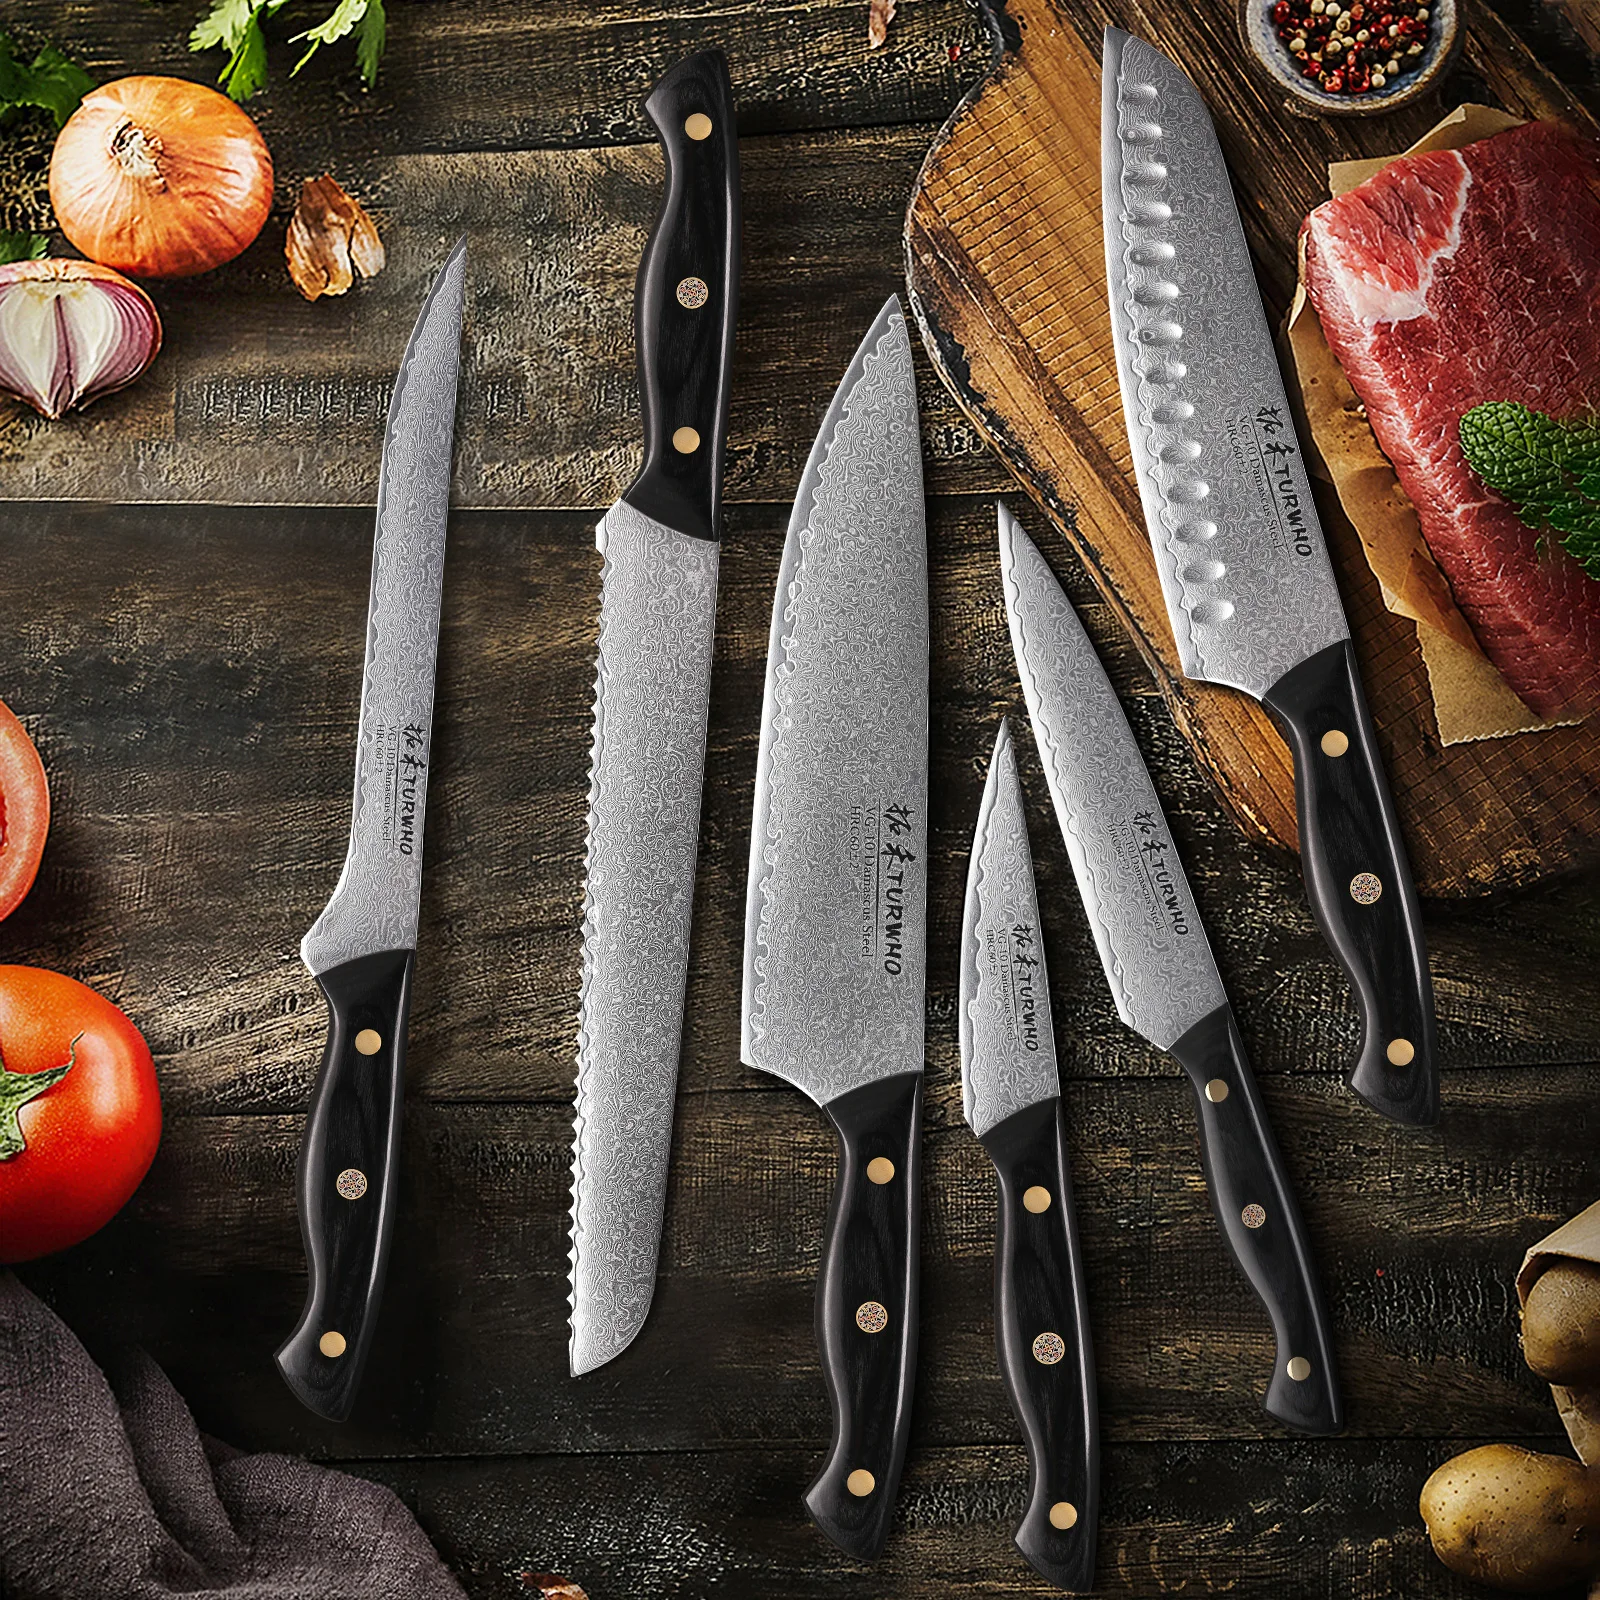 Turwho 6 Pcs Kitchen Knives Sets High Carbon Japanese Vg10 Damascus Steel  Chef Santoku Cleaver Bread Utility Knife G10 Handle - Knife Sets -  AliExpress